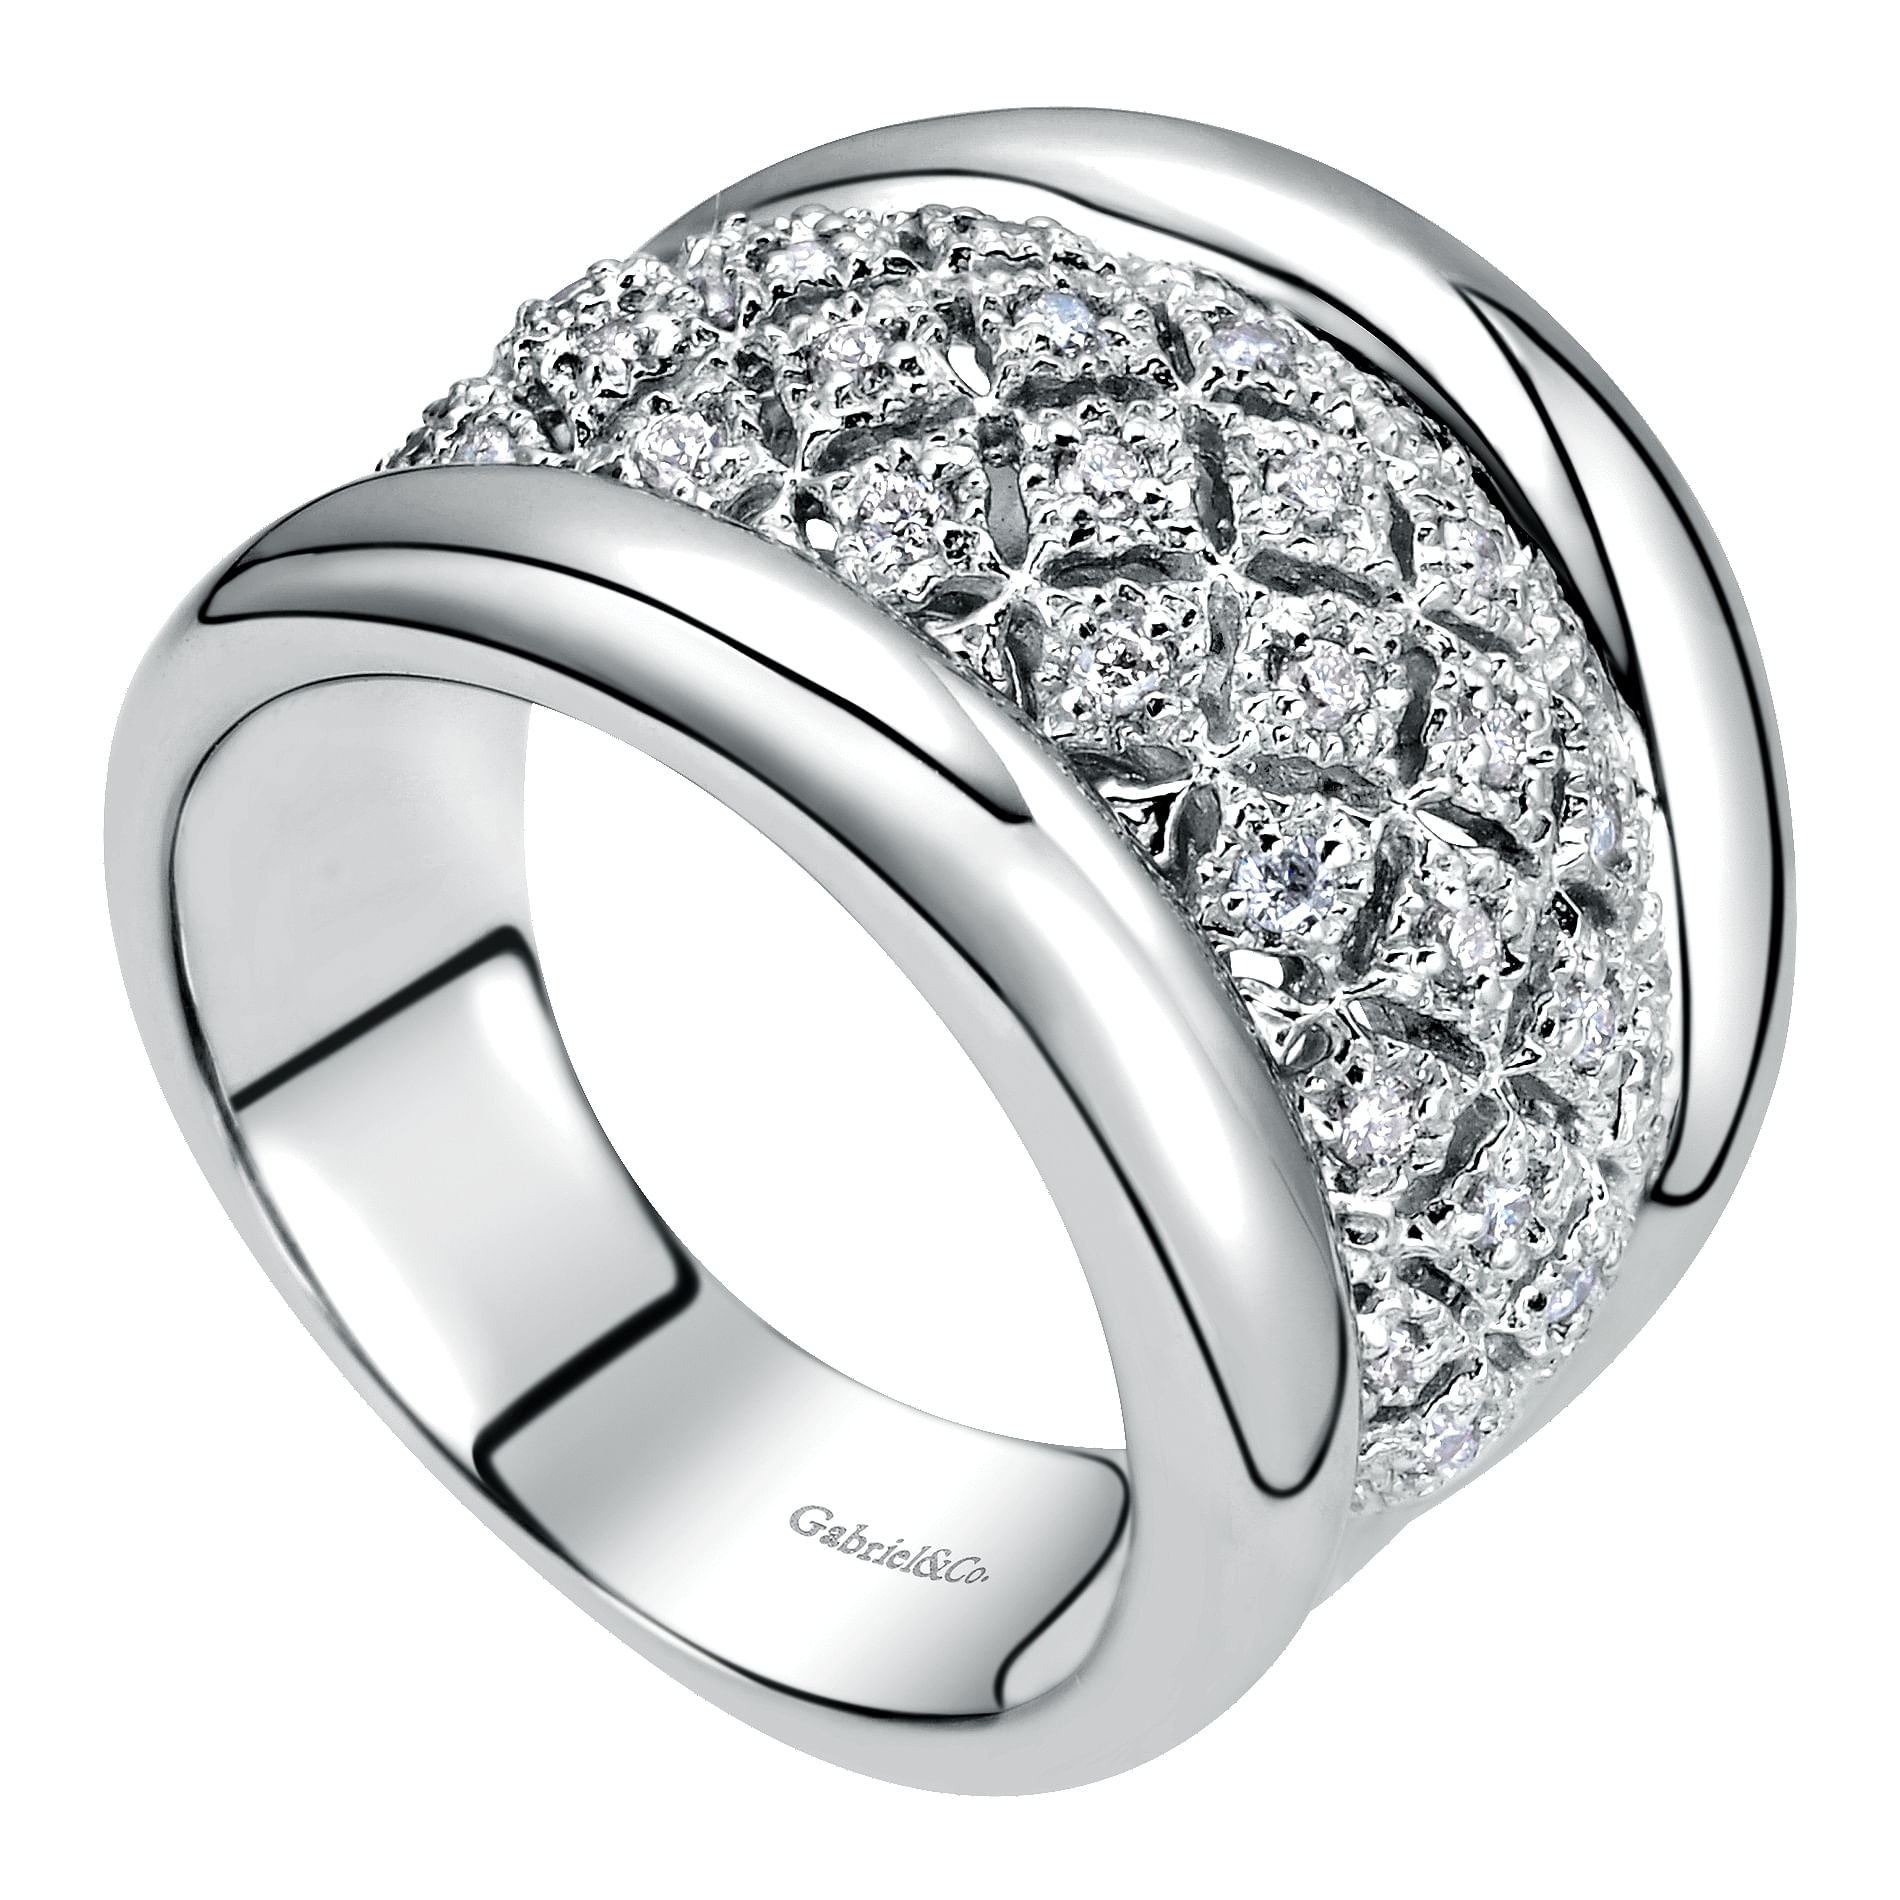 925 Sterling Silver Wide Band Ring with Open Work Diamond Center